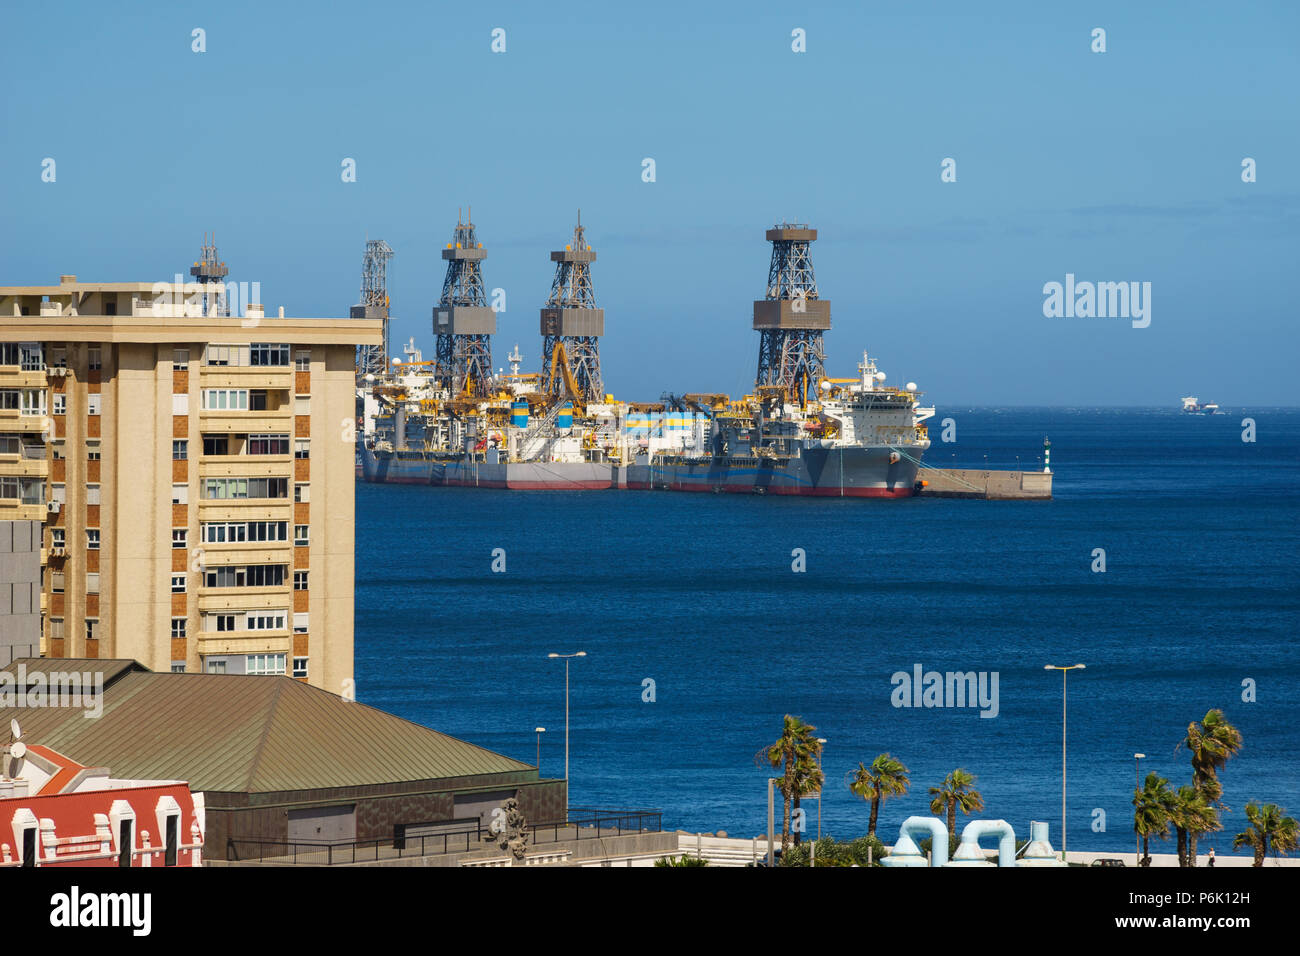 Drillships near coastal city. Oil and gas offshore drilling Stock Photo